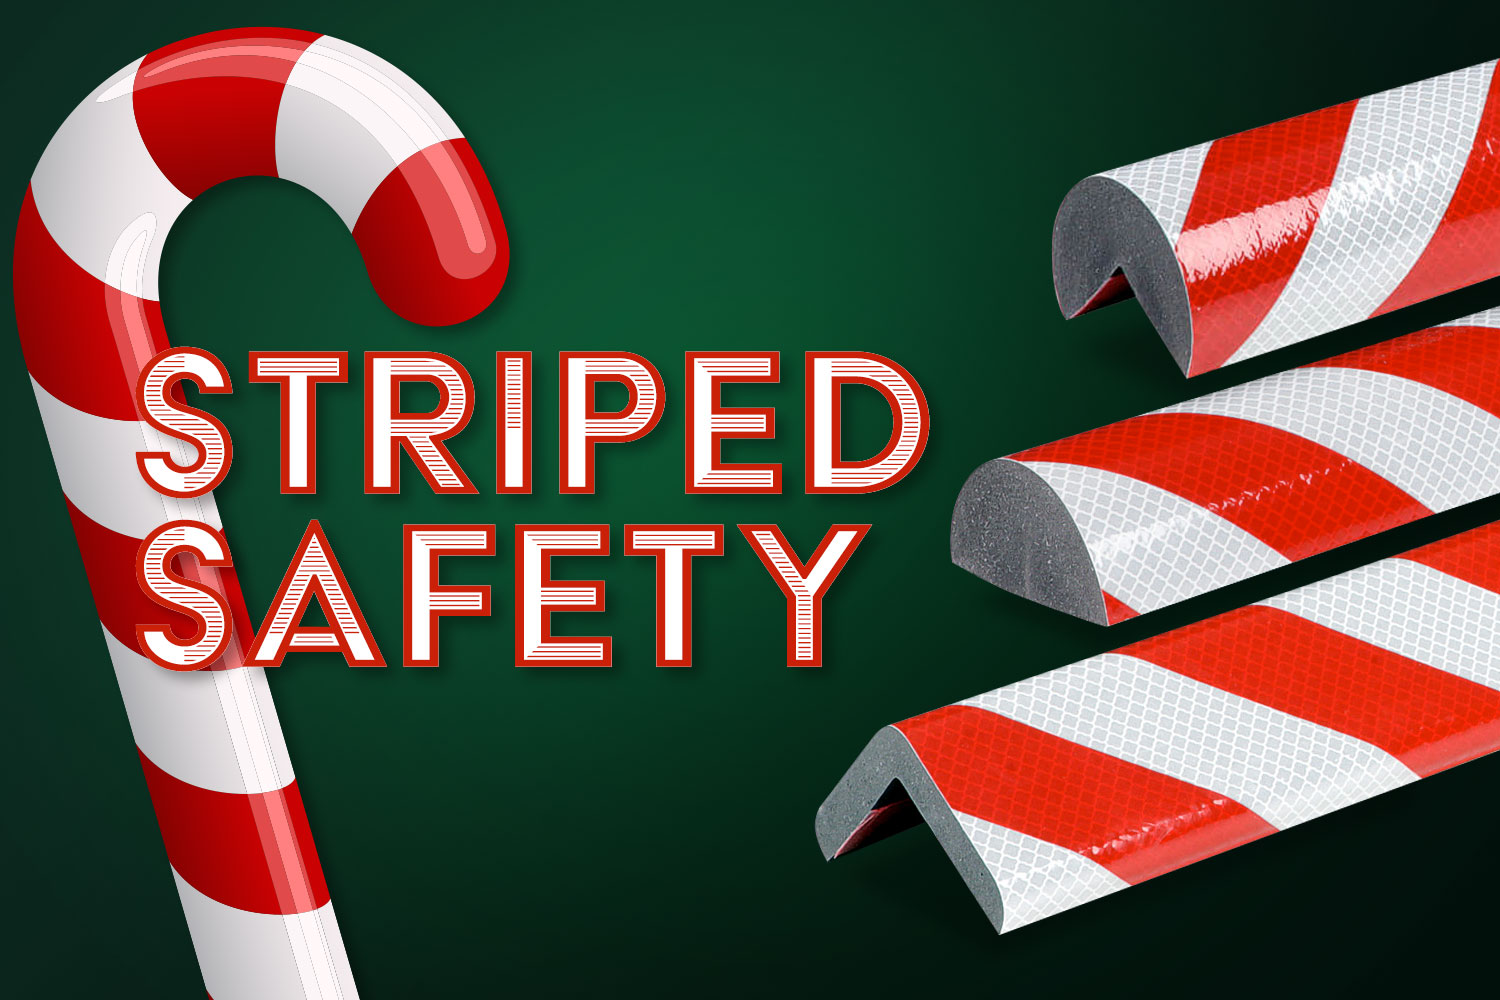 Striped safety with Reflective Safety Foam Guards